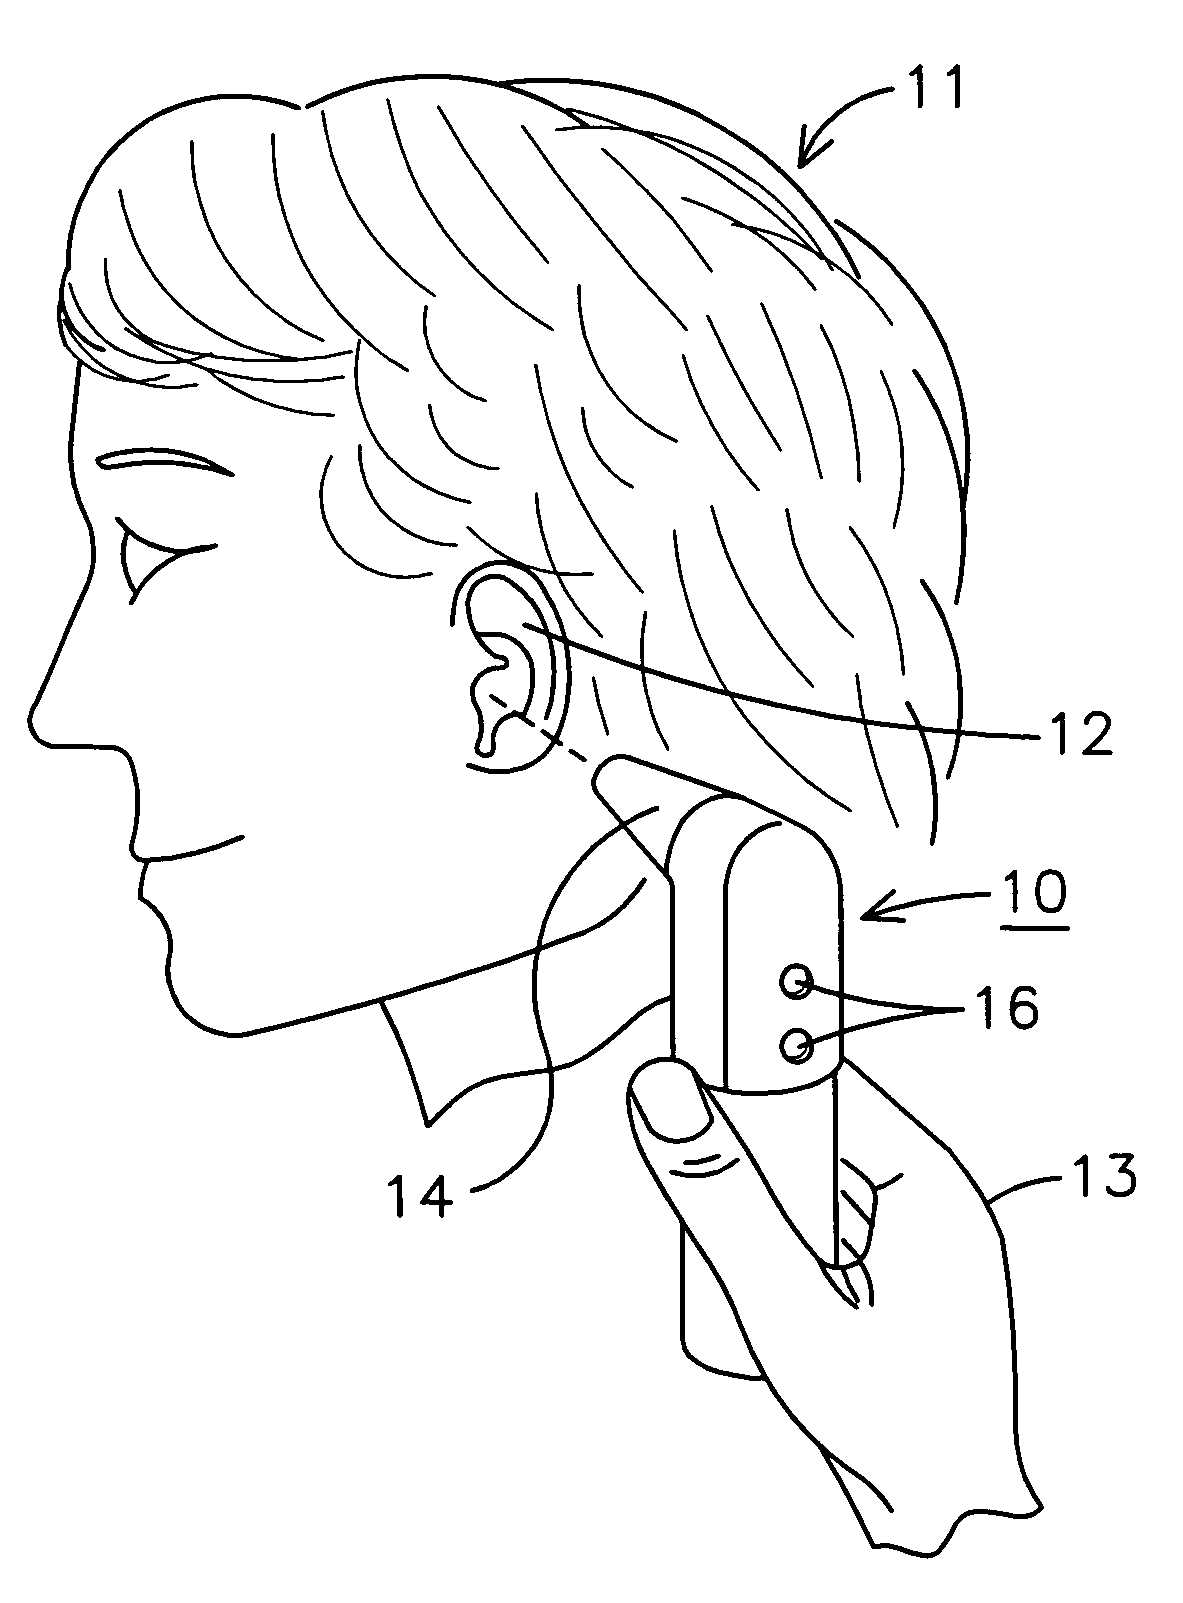 Ear cleaning apparatus